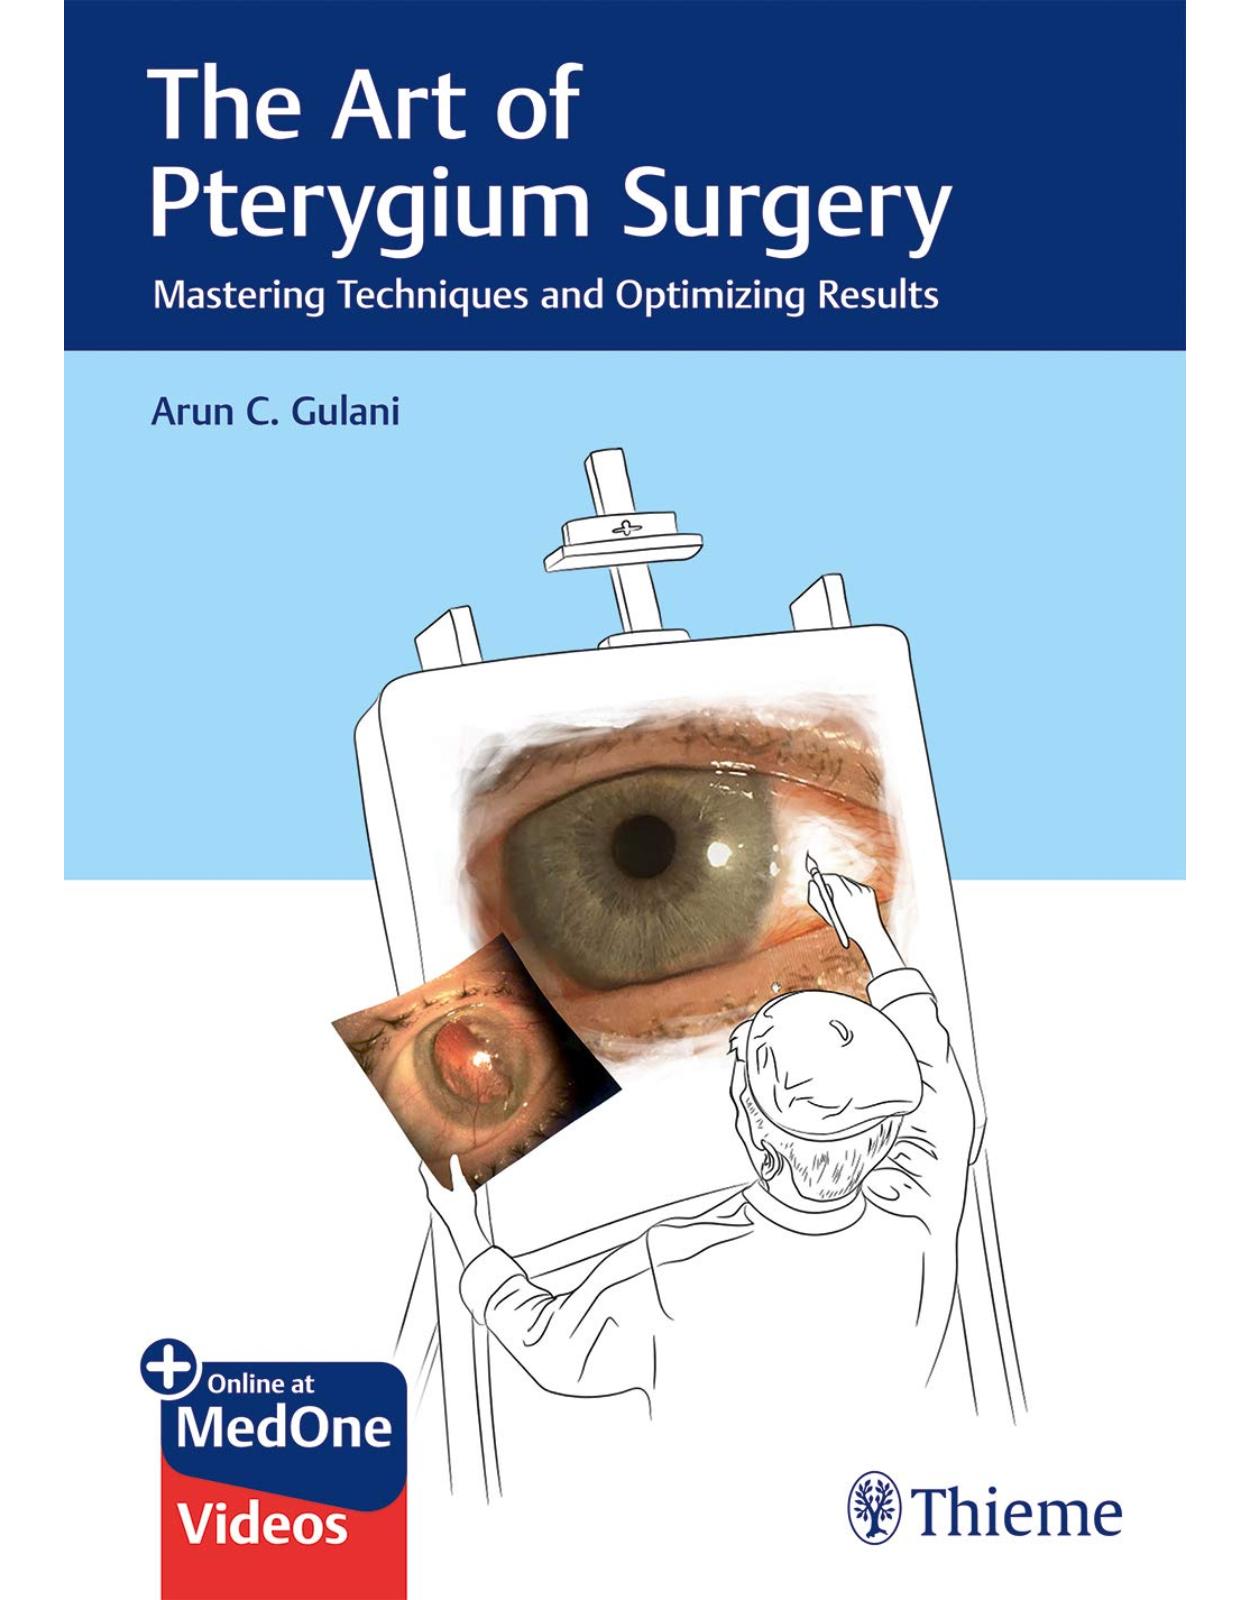 The Art of Pterygium Surgery: Mastering Techniques and Optimizing Results